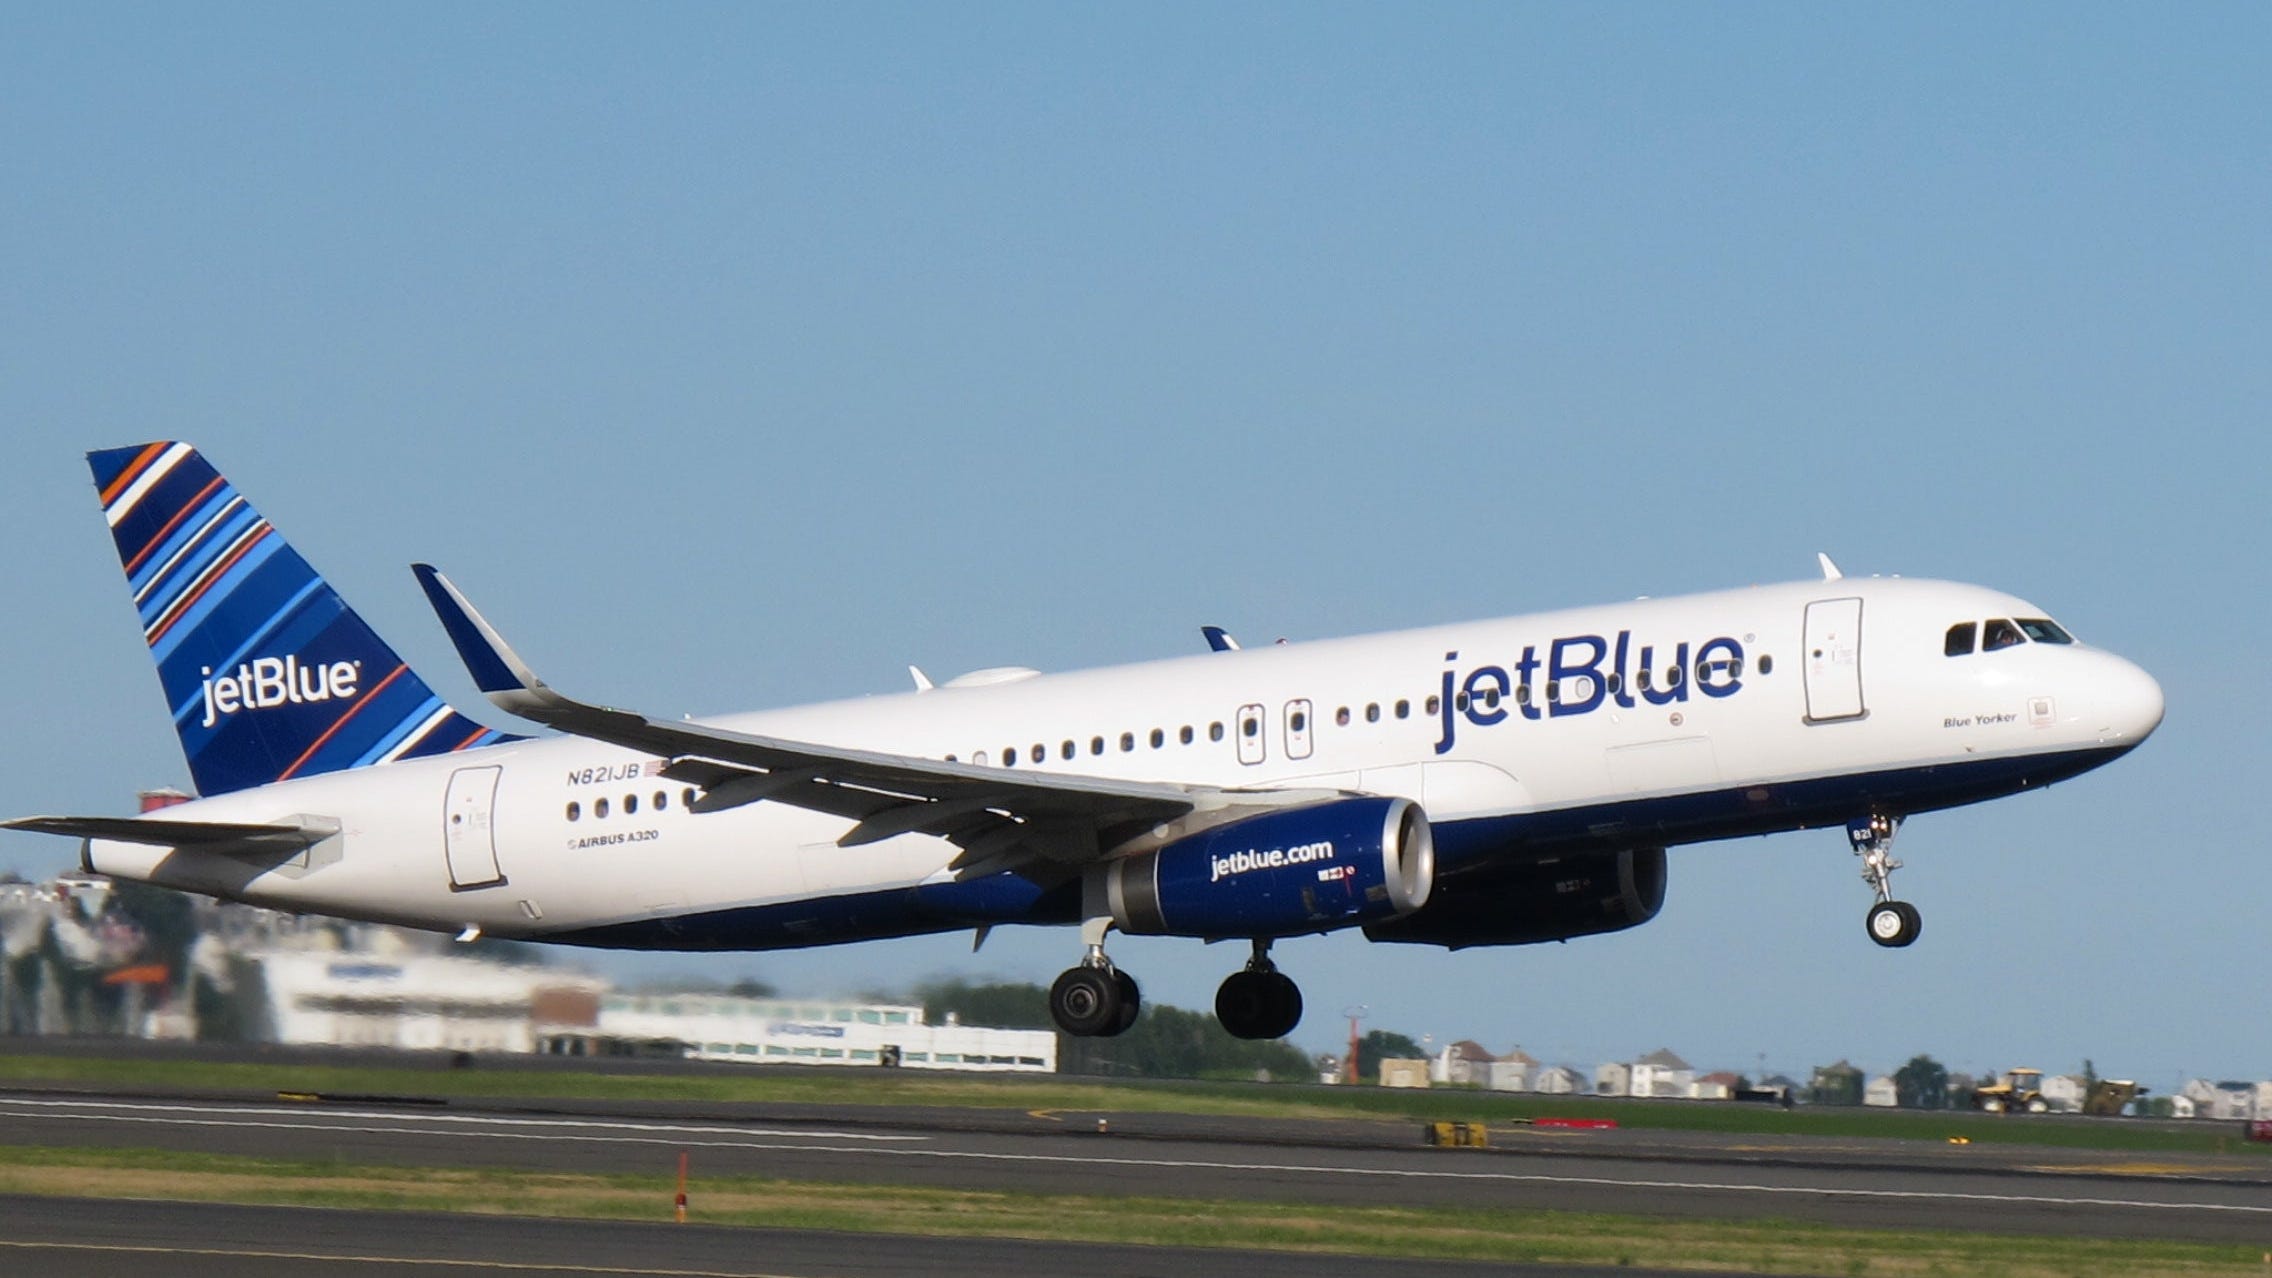 JetBlue flights: Airline adding 30 new routes, Mint out of Newark